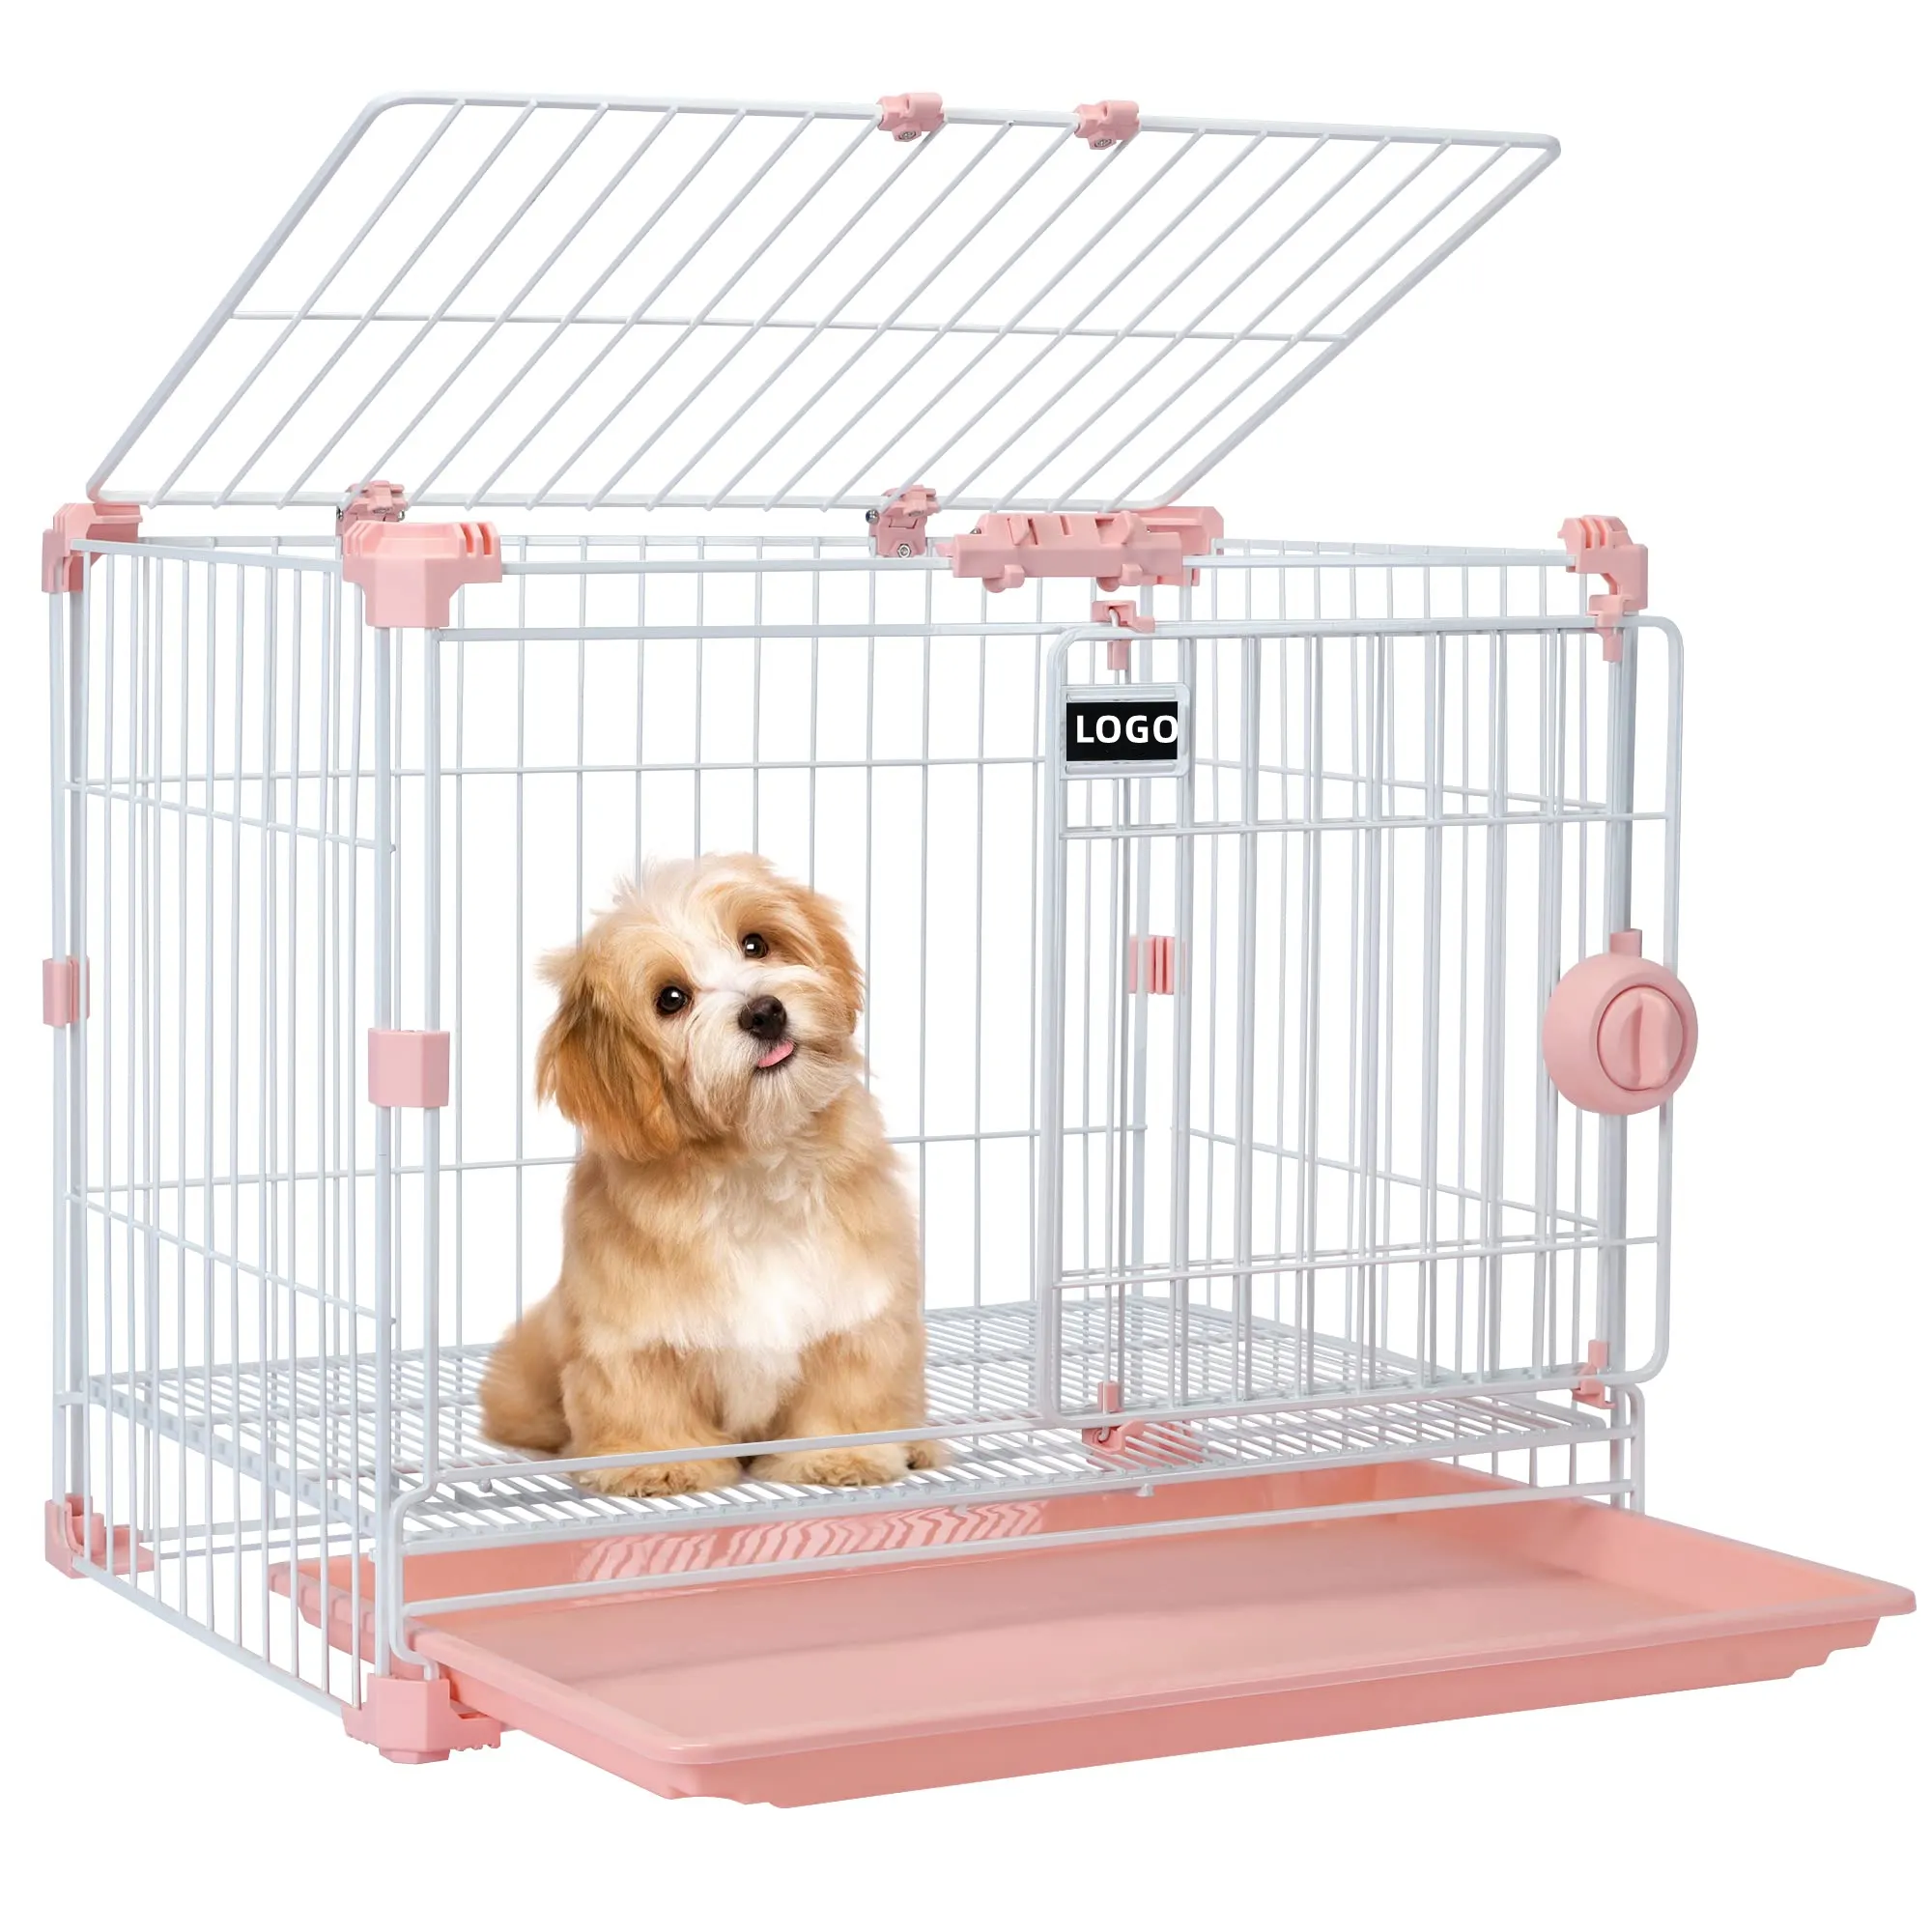 Hot Selling Stainless Steel Heavy Duty Cage Playpen Dog Double Door Kennel Wholesale Black Metal Durable Pet Crate